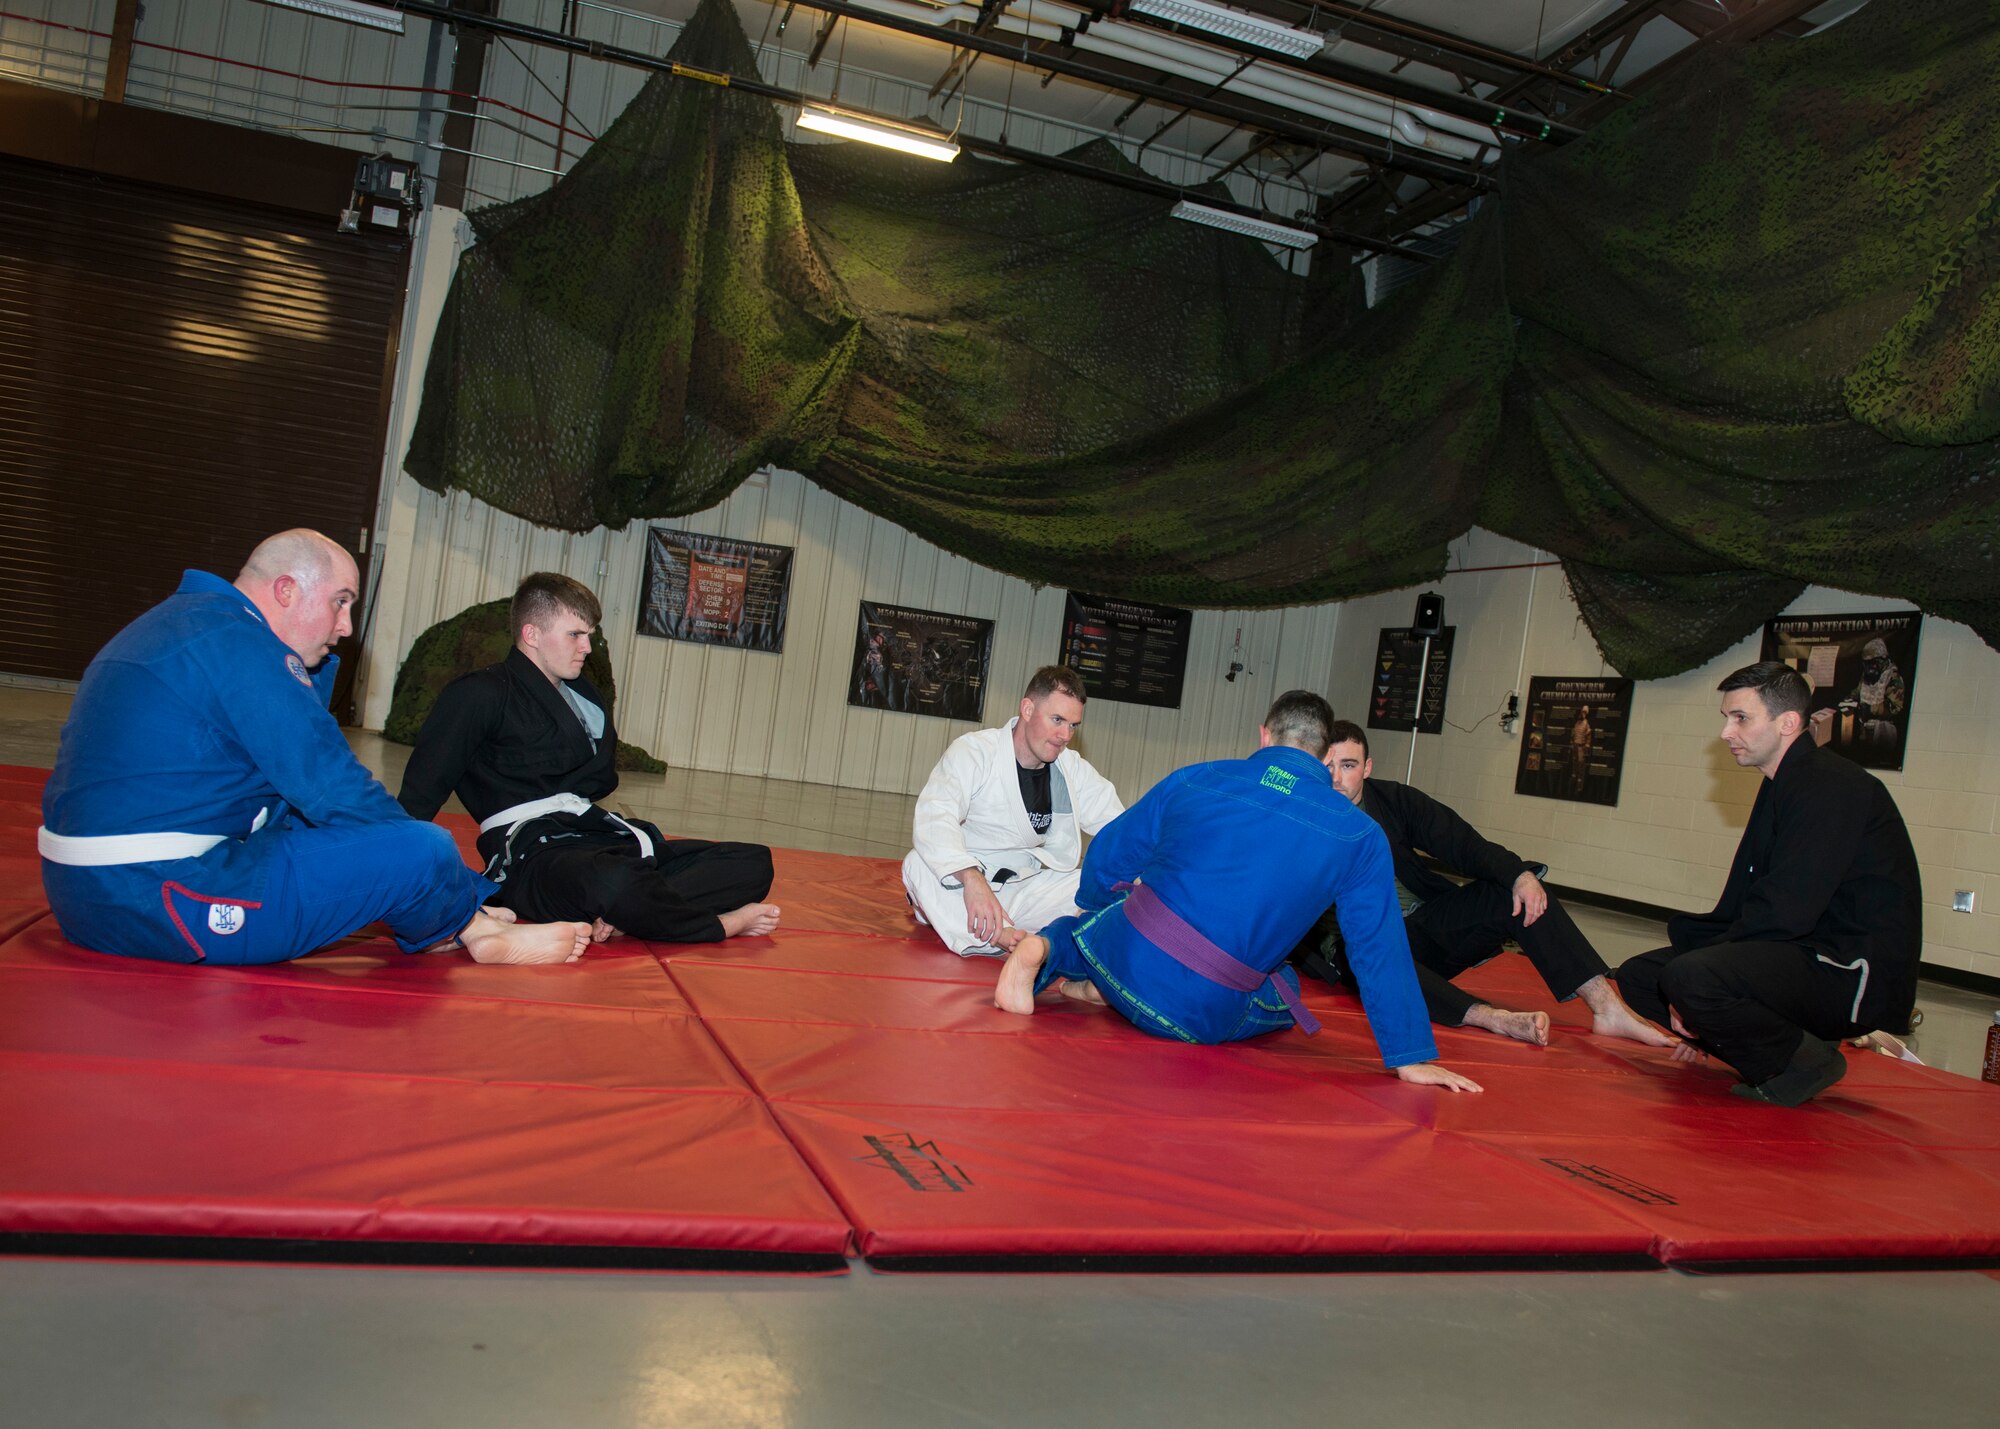 U.S. Air Force Master Sgt. Ian McMahon (front-center), combatives instructor and Security Forces Squadron flight chief, 103rd Airlift Wing, Connecticut Air National Guard, instructs a group of squadron members during an informal jiu-jitsu session at Bradley Air National Guard Base, East Granby, Conn. Jan. 23, 2020. The group that practices jiu-jitsu at the 103rd AW monthly to build camaraderie between the members while utilizing combatives skills and outside experience in the martial art. (U.S. Air National Guard photo by Staff Sgt. Steven Tucker)